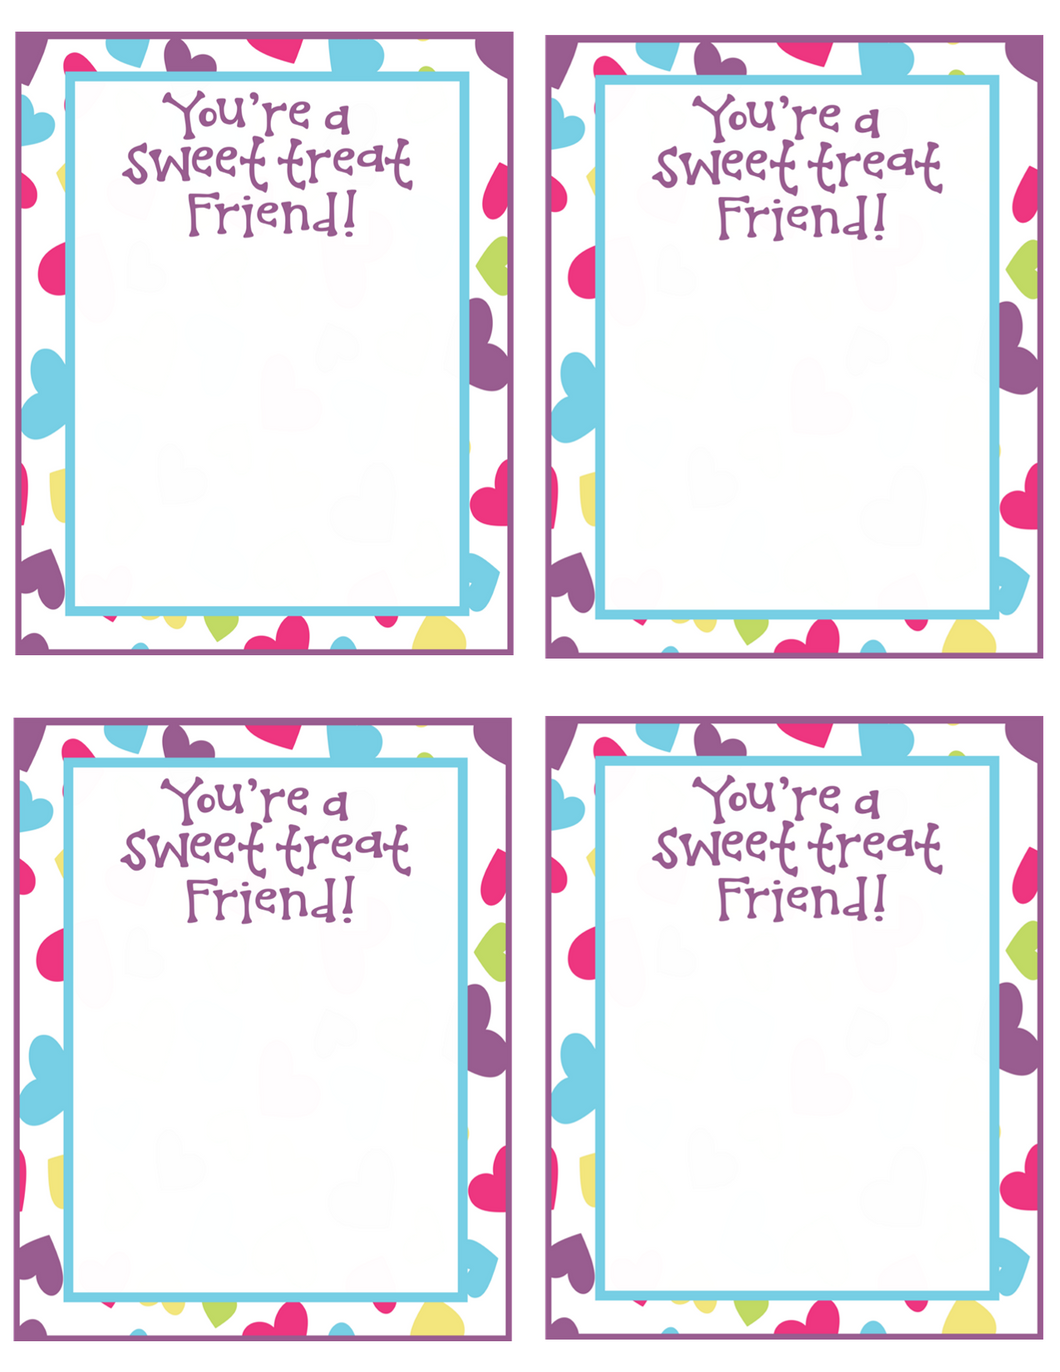 Sweet Treat Friend VDay Card 4x5 - Dots and Bows Designs